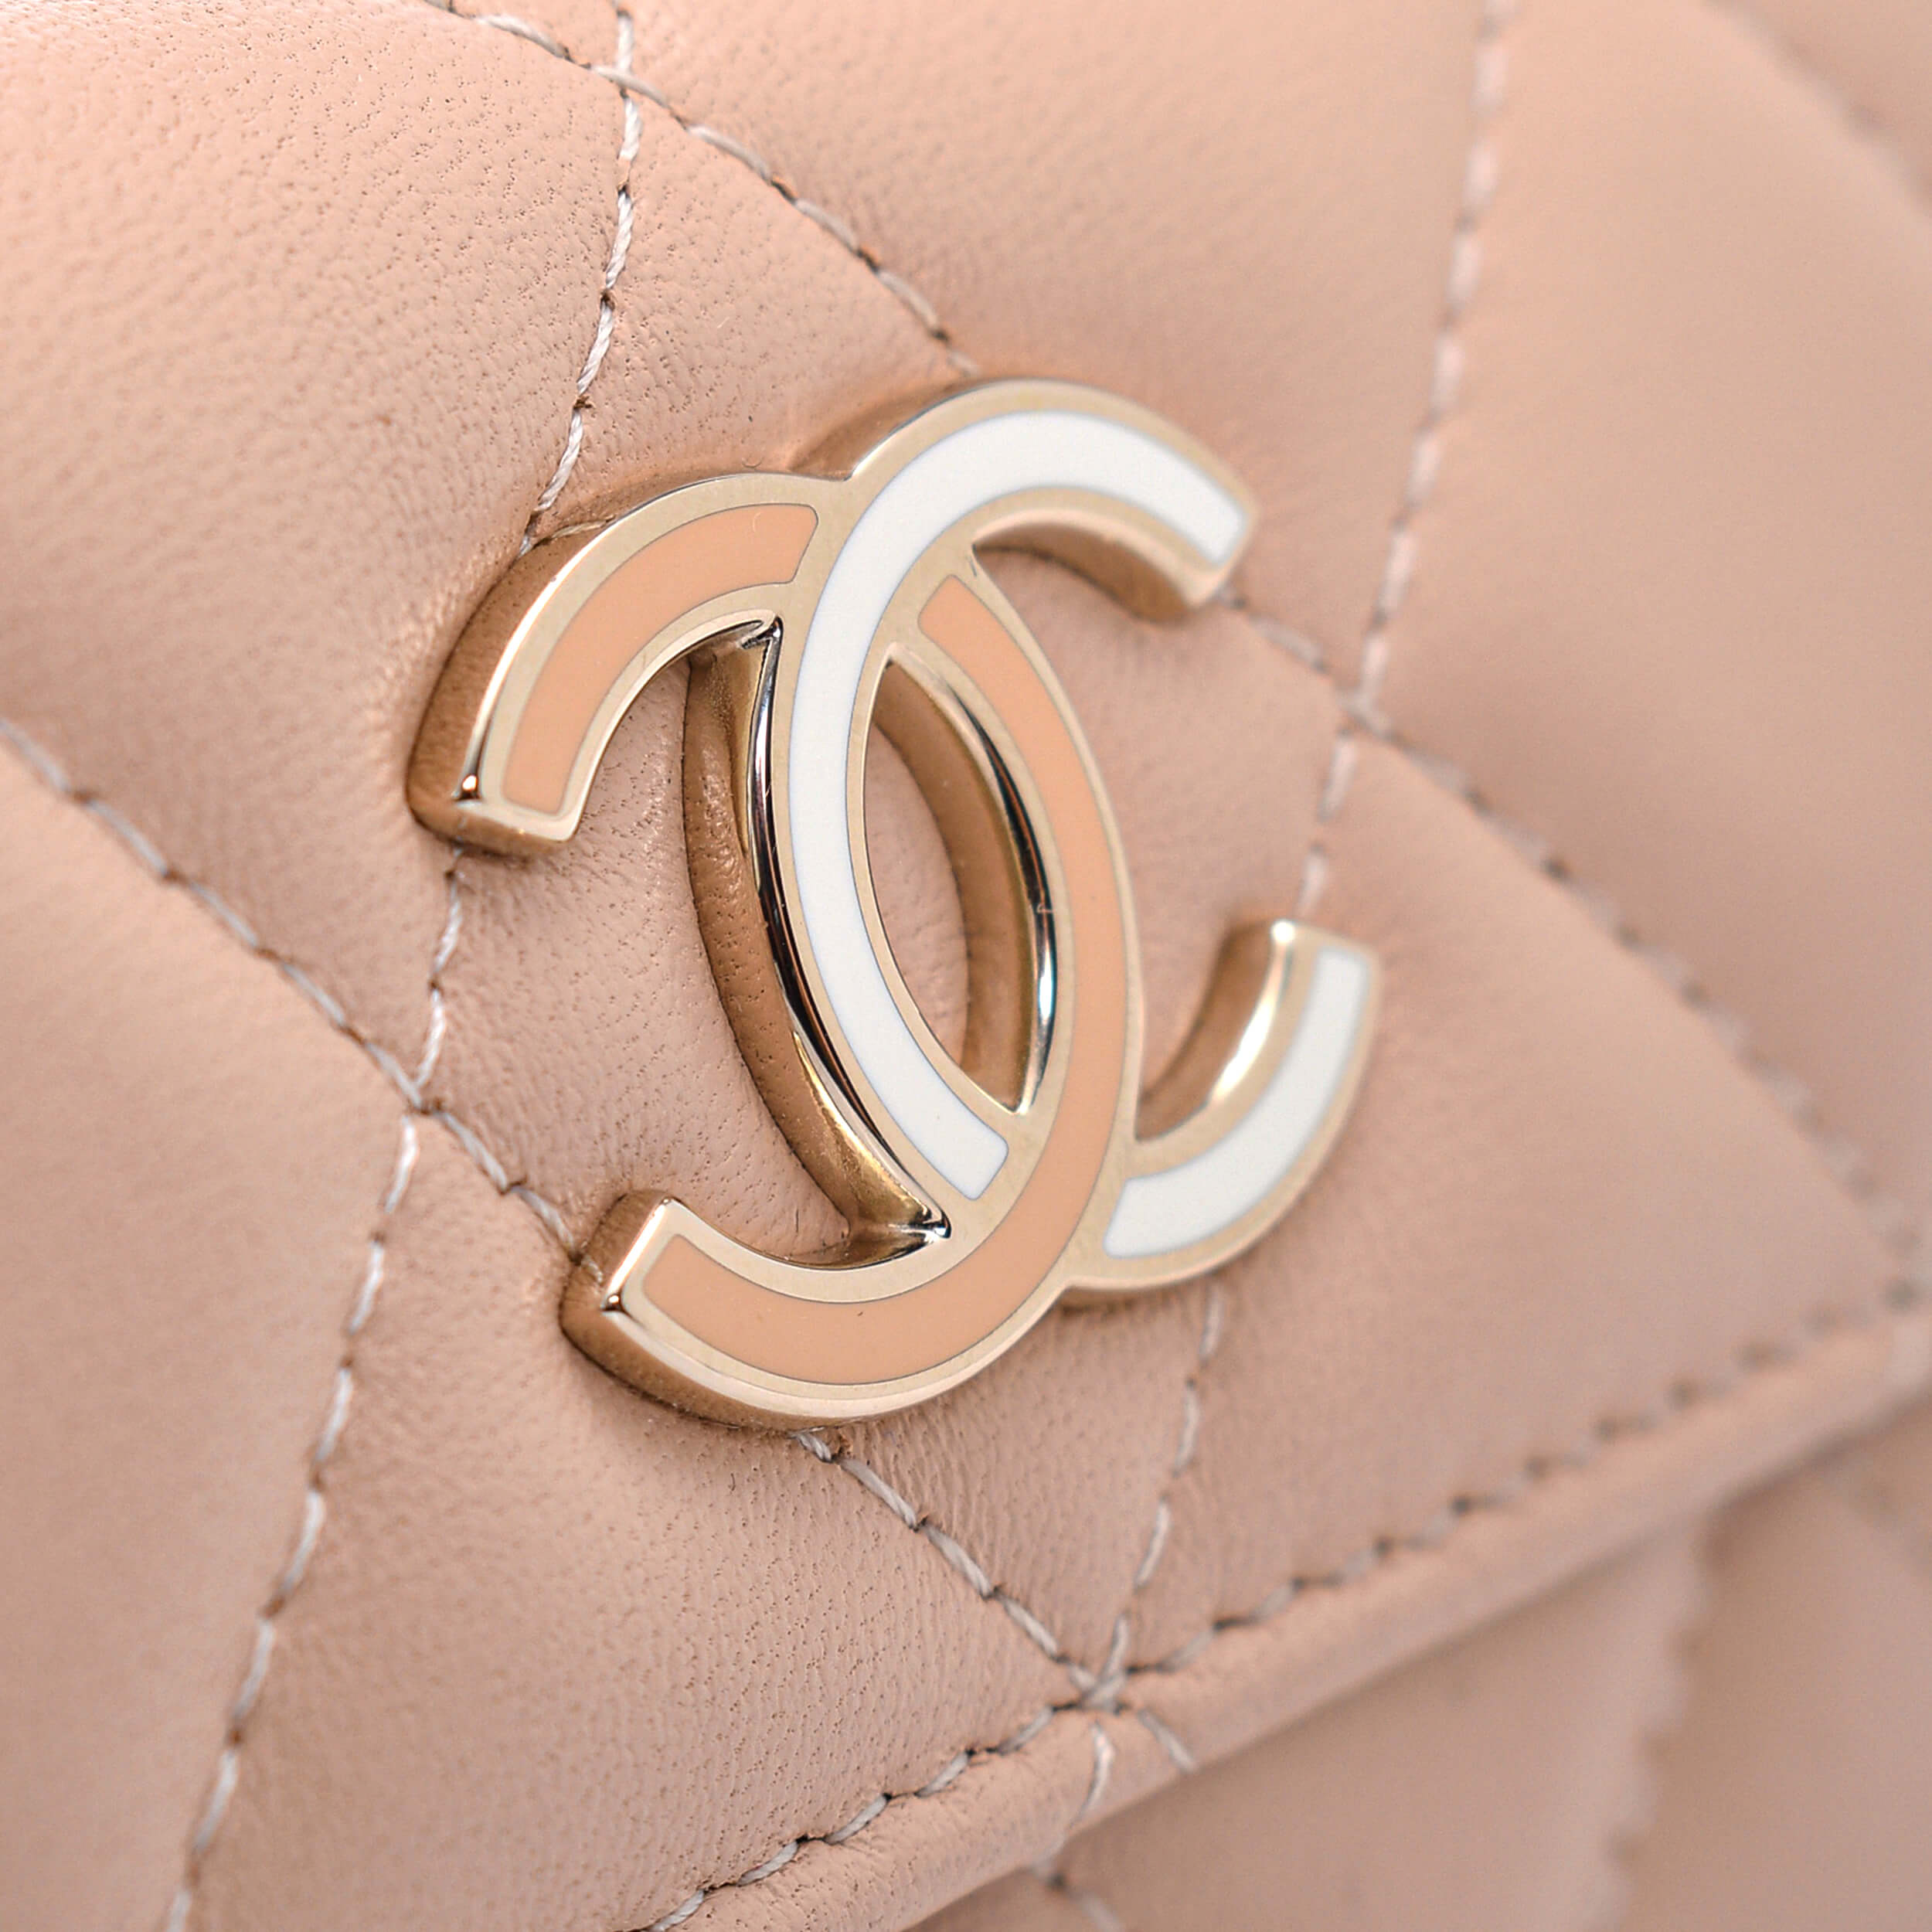 Chanel - Beige Quilted Lambskin Leather Card Holder